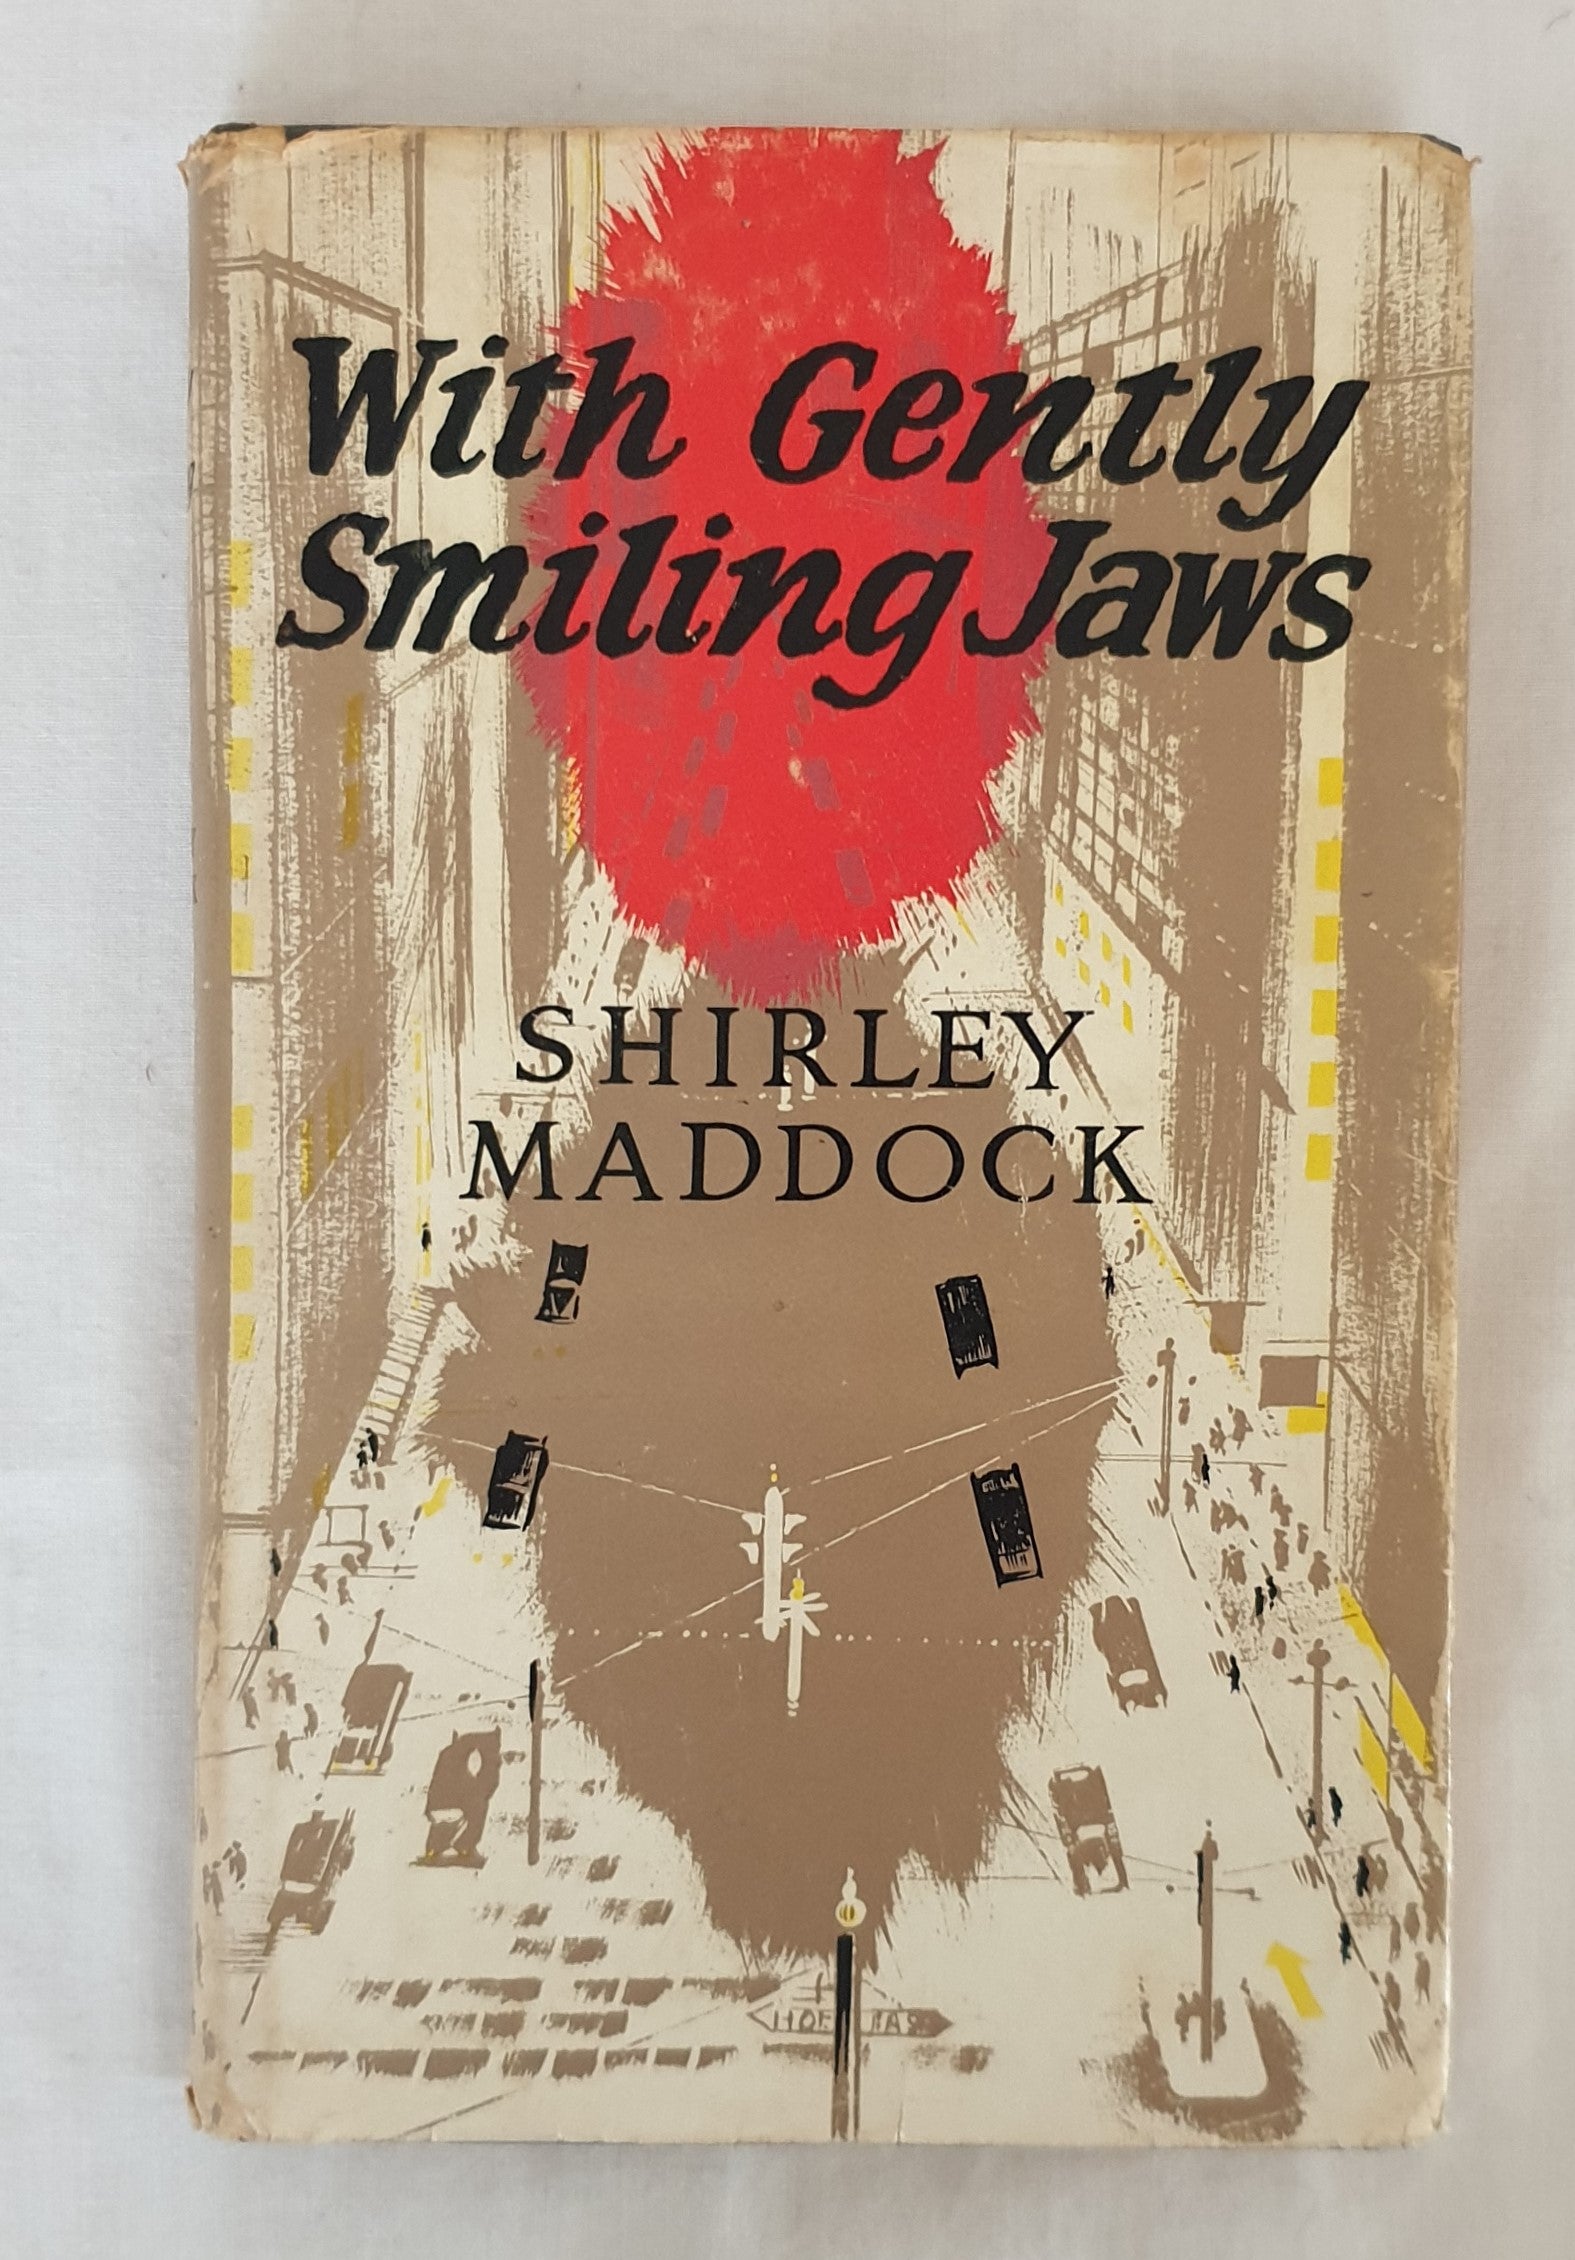 With Gently Smiling Jaws by Shirley Maddock